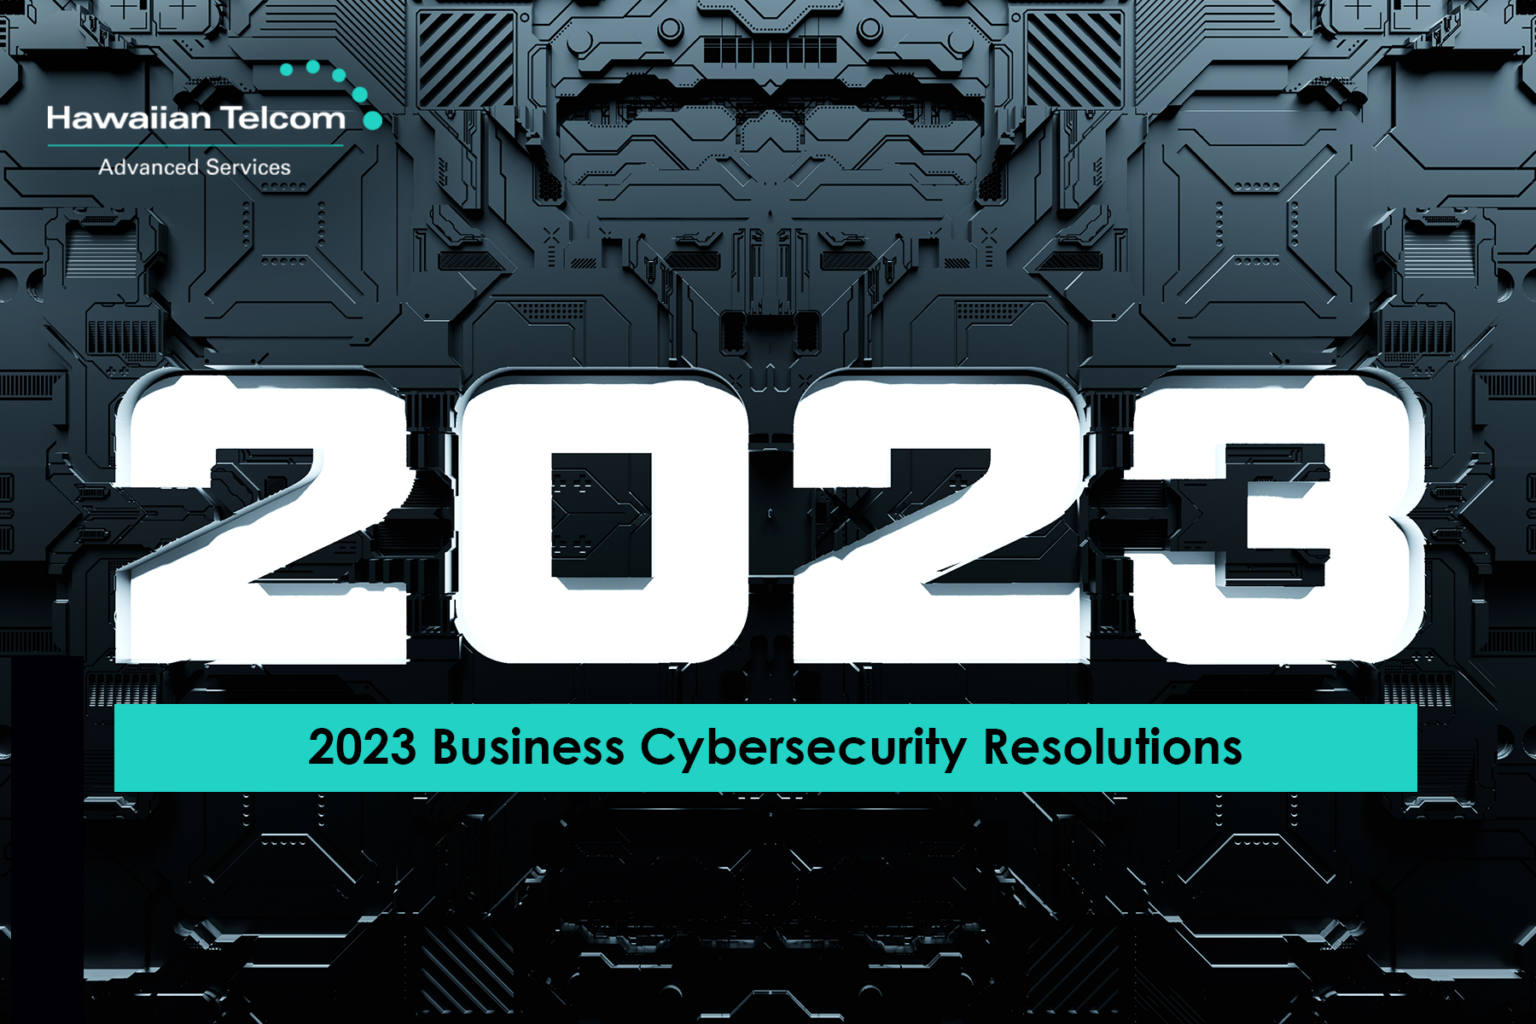 For the full list of 2023 Business Cybersecurity Resolutions and a more in–depth discussion on how to achieve them register for the Hawaiian Telcom University Virtual Event.